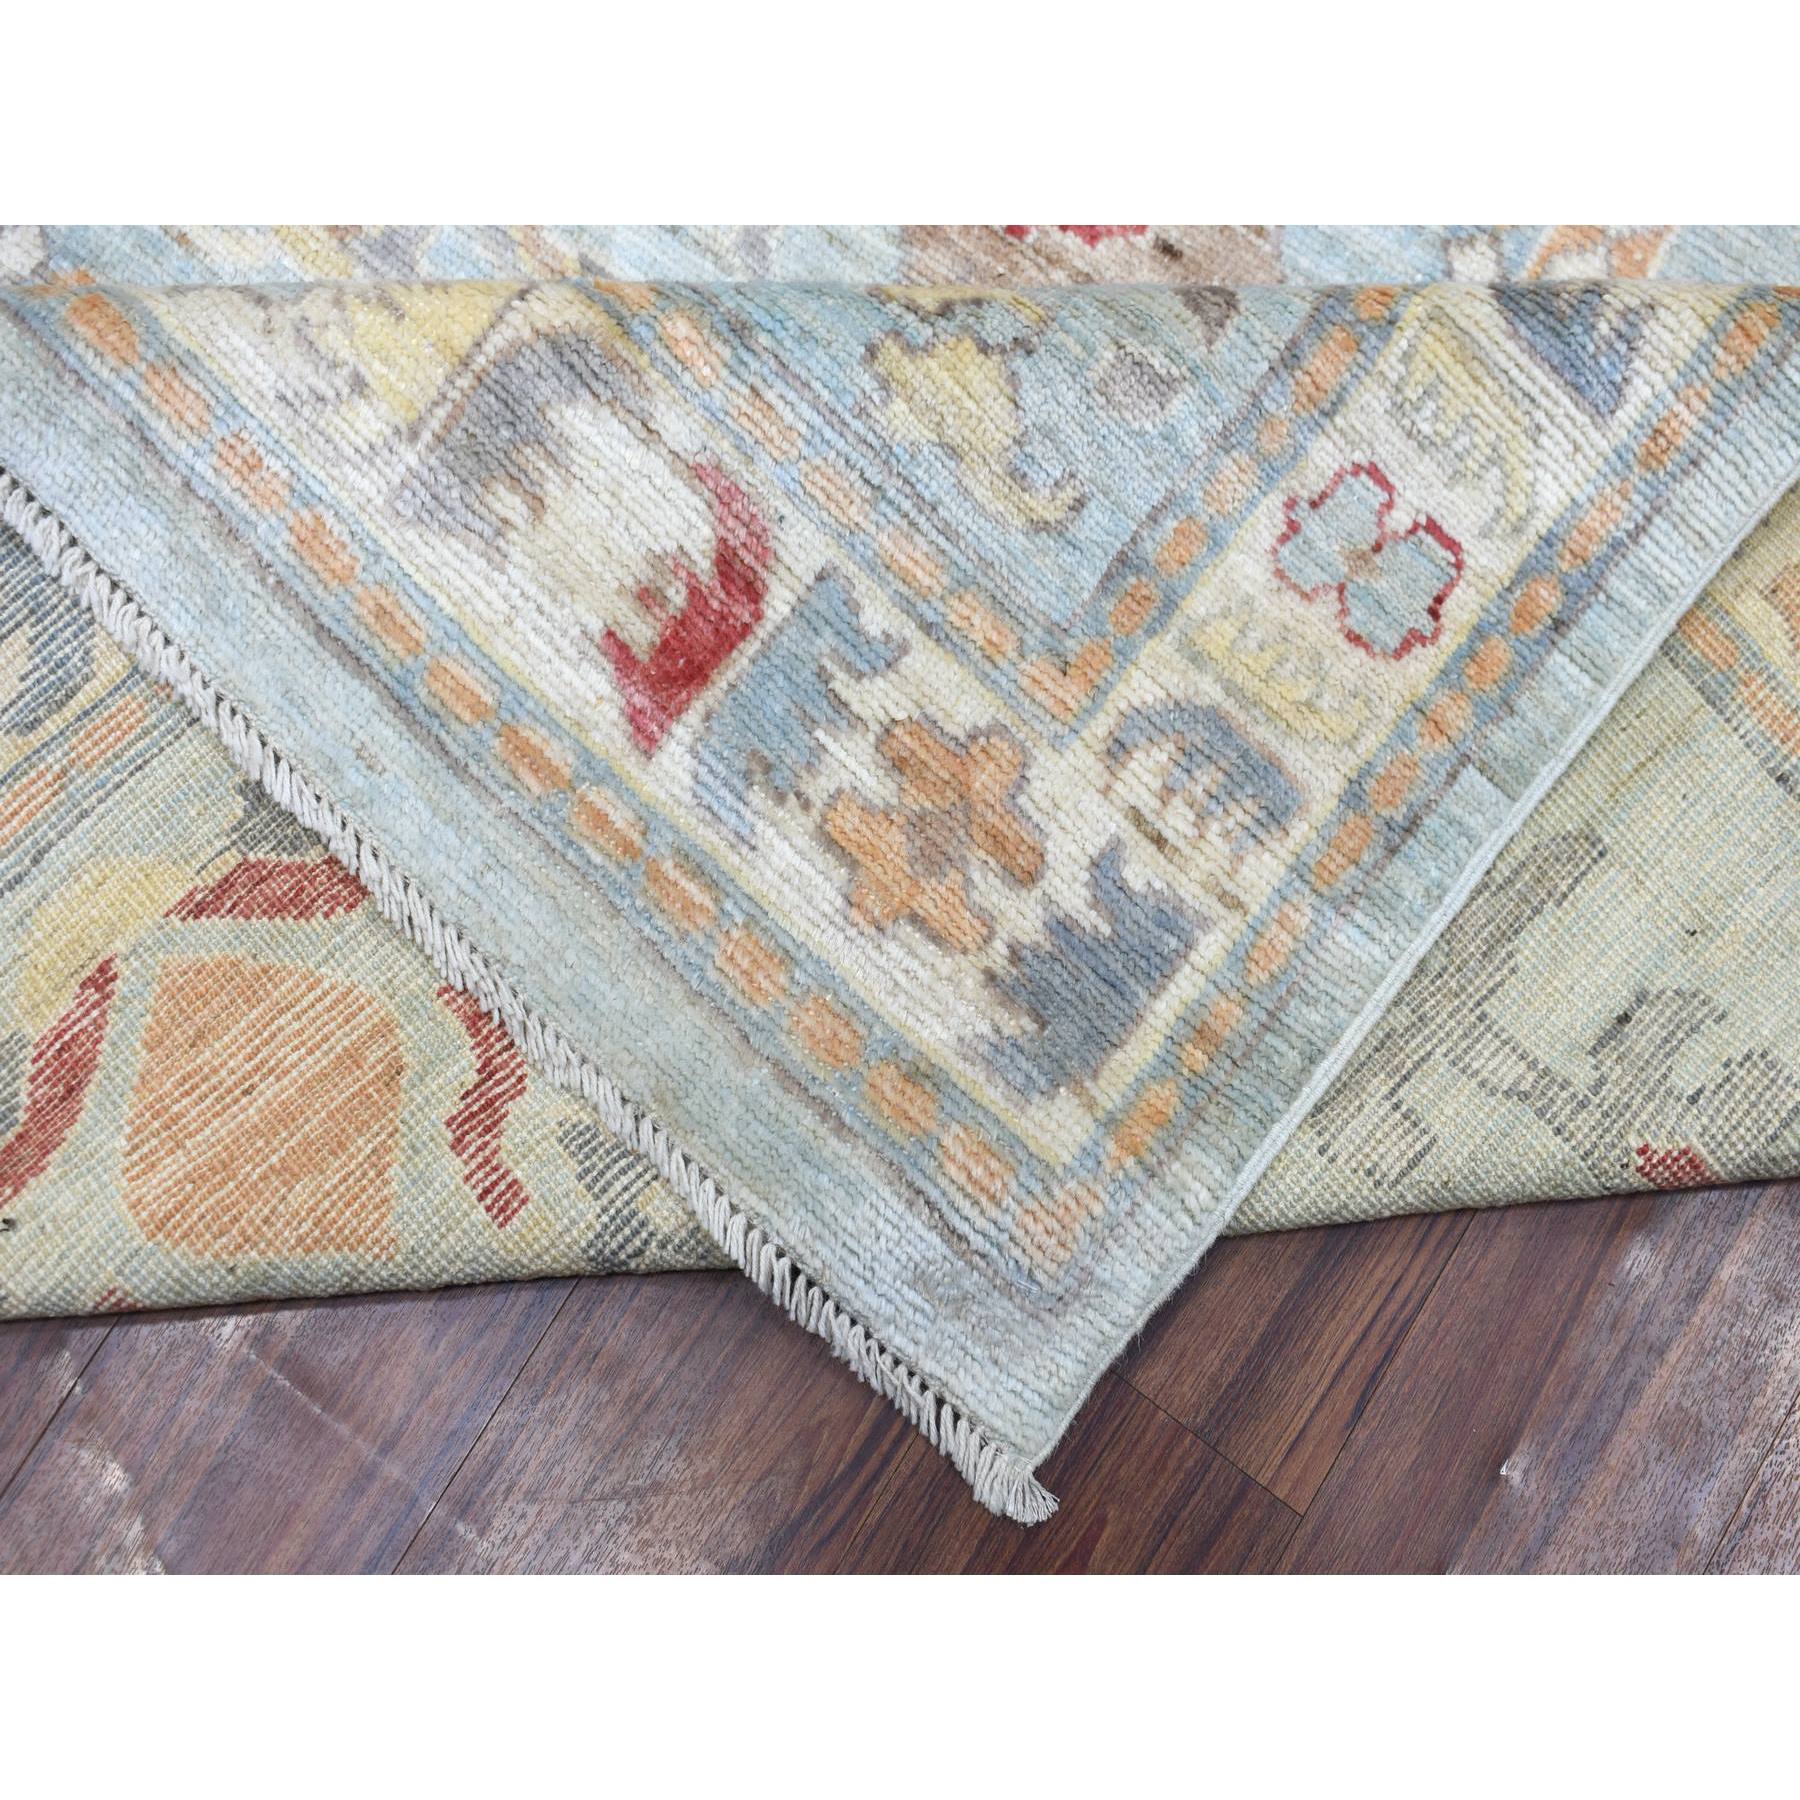 11'5"x16' Light Blue All Over Design Angora Oushak with a Beautiful, Floral Pattern Hand Woven Soft, Afghan Wool Oriental Oversized Rug 